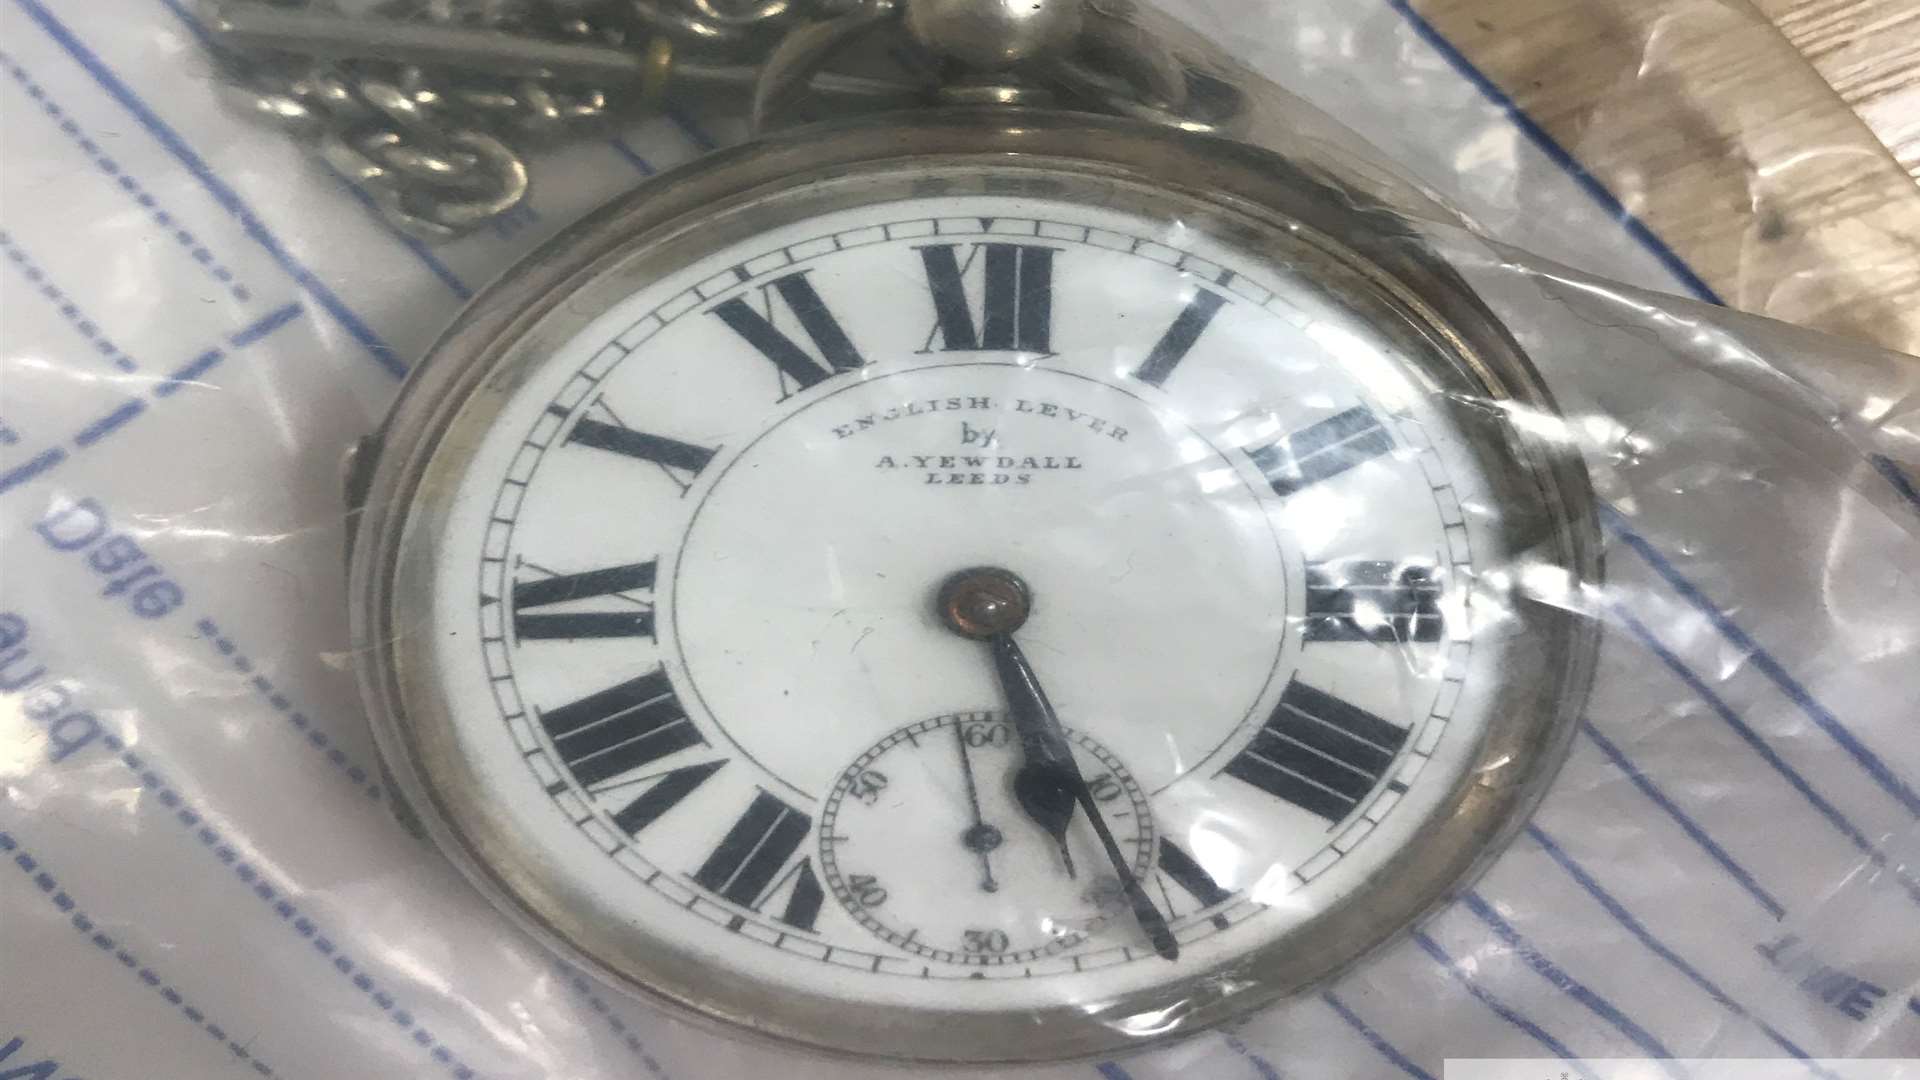 Officers were investigating a burglary when they searched the home of a suspect in Dartford and found the pocket watch.